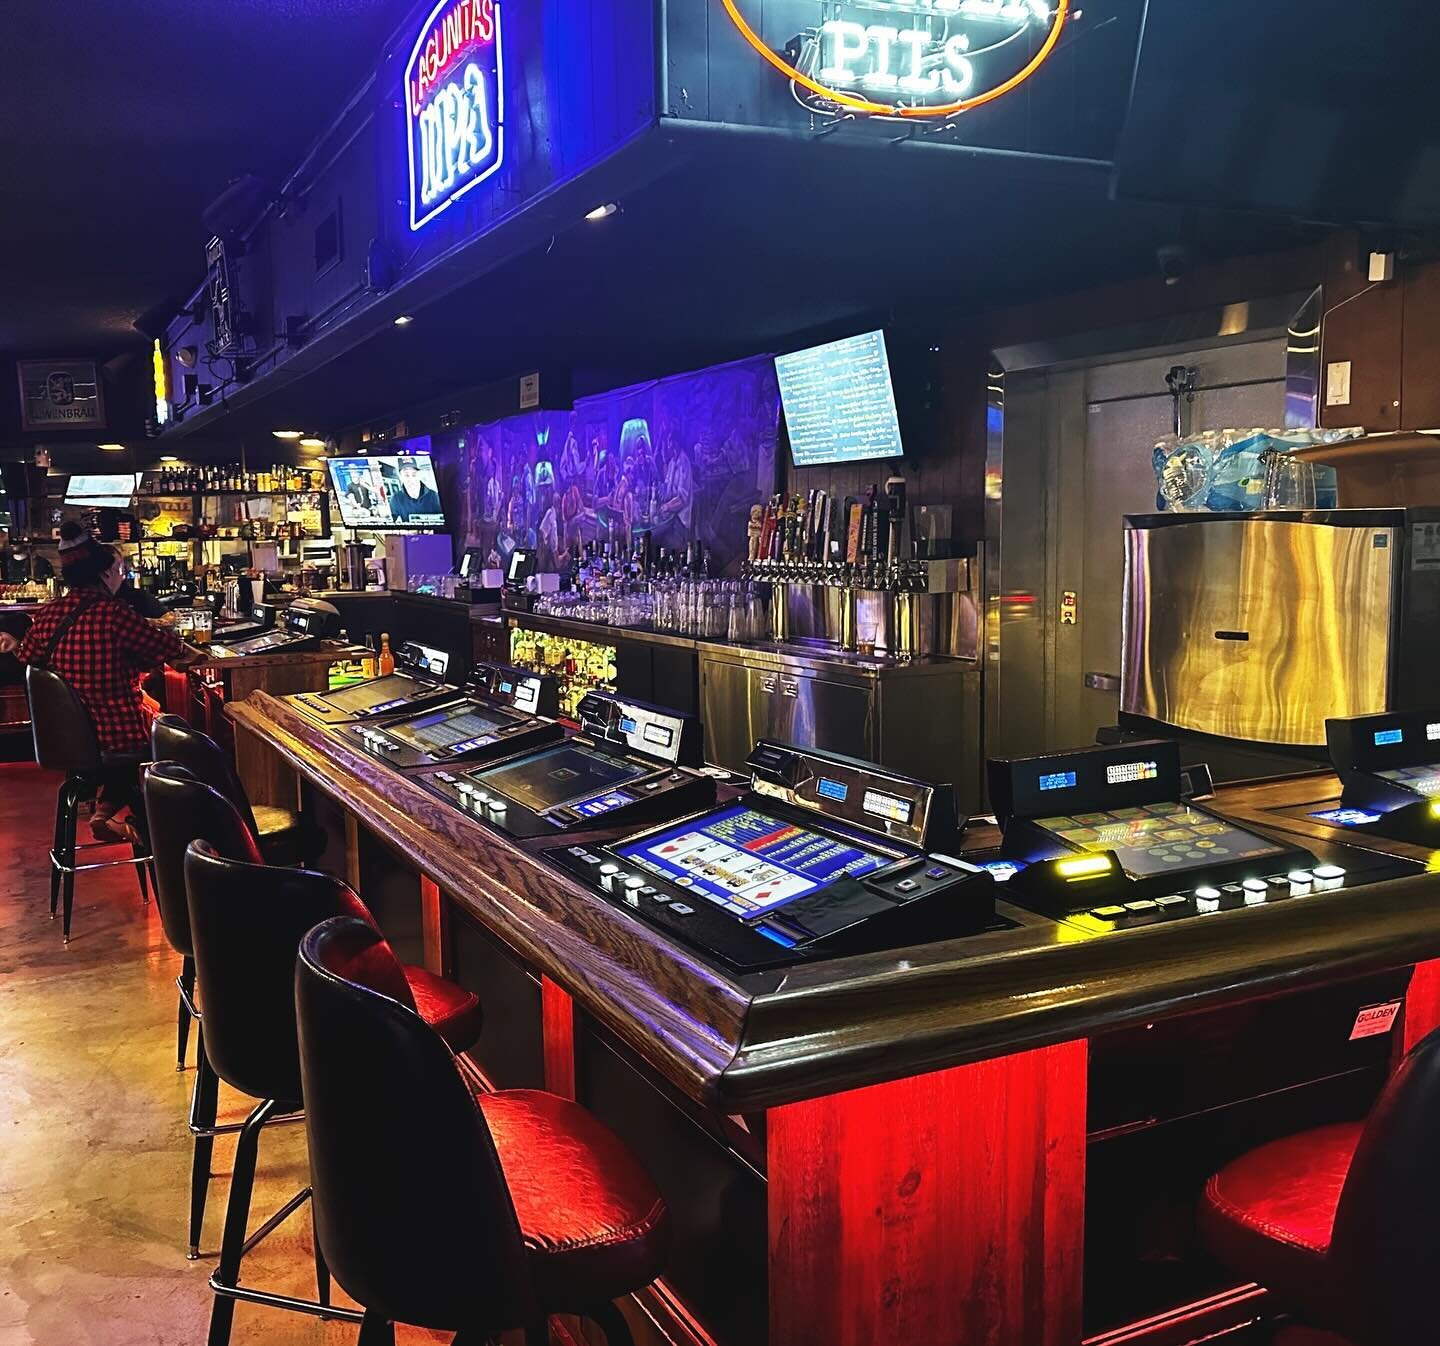 🚨After an 18 month hiatus&hellip;gaming is back at Hard Hat Lounge!!🚨

🎰🎰🎰

With gaming returning, we will transition to being open 24 hours a day, 7 days a week starting this Friday, February 2nd and will make announcements regarding kitchen ho